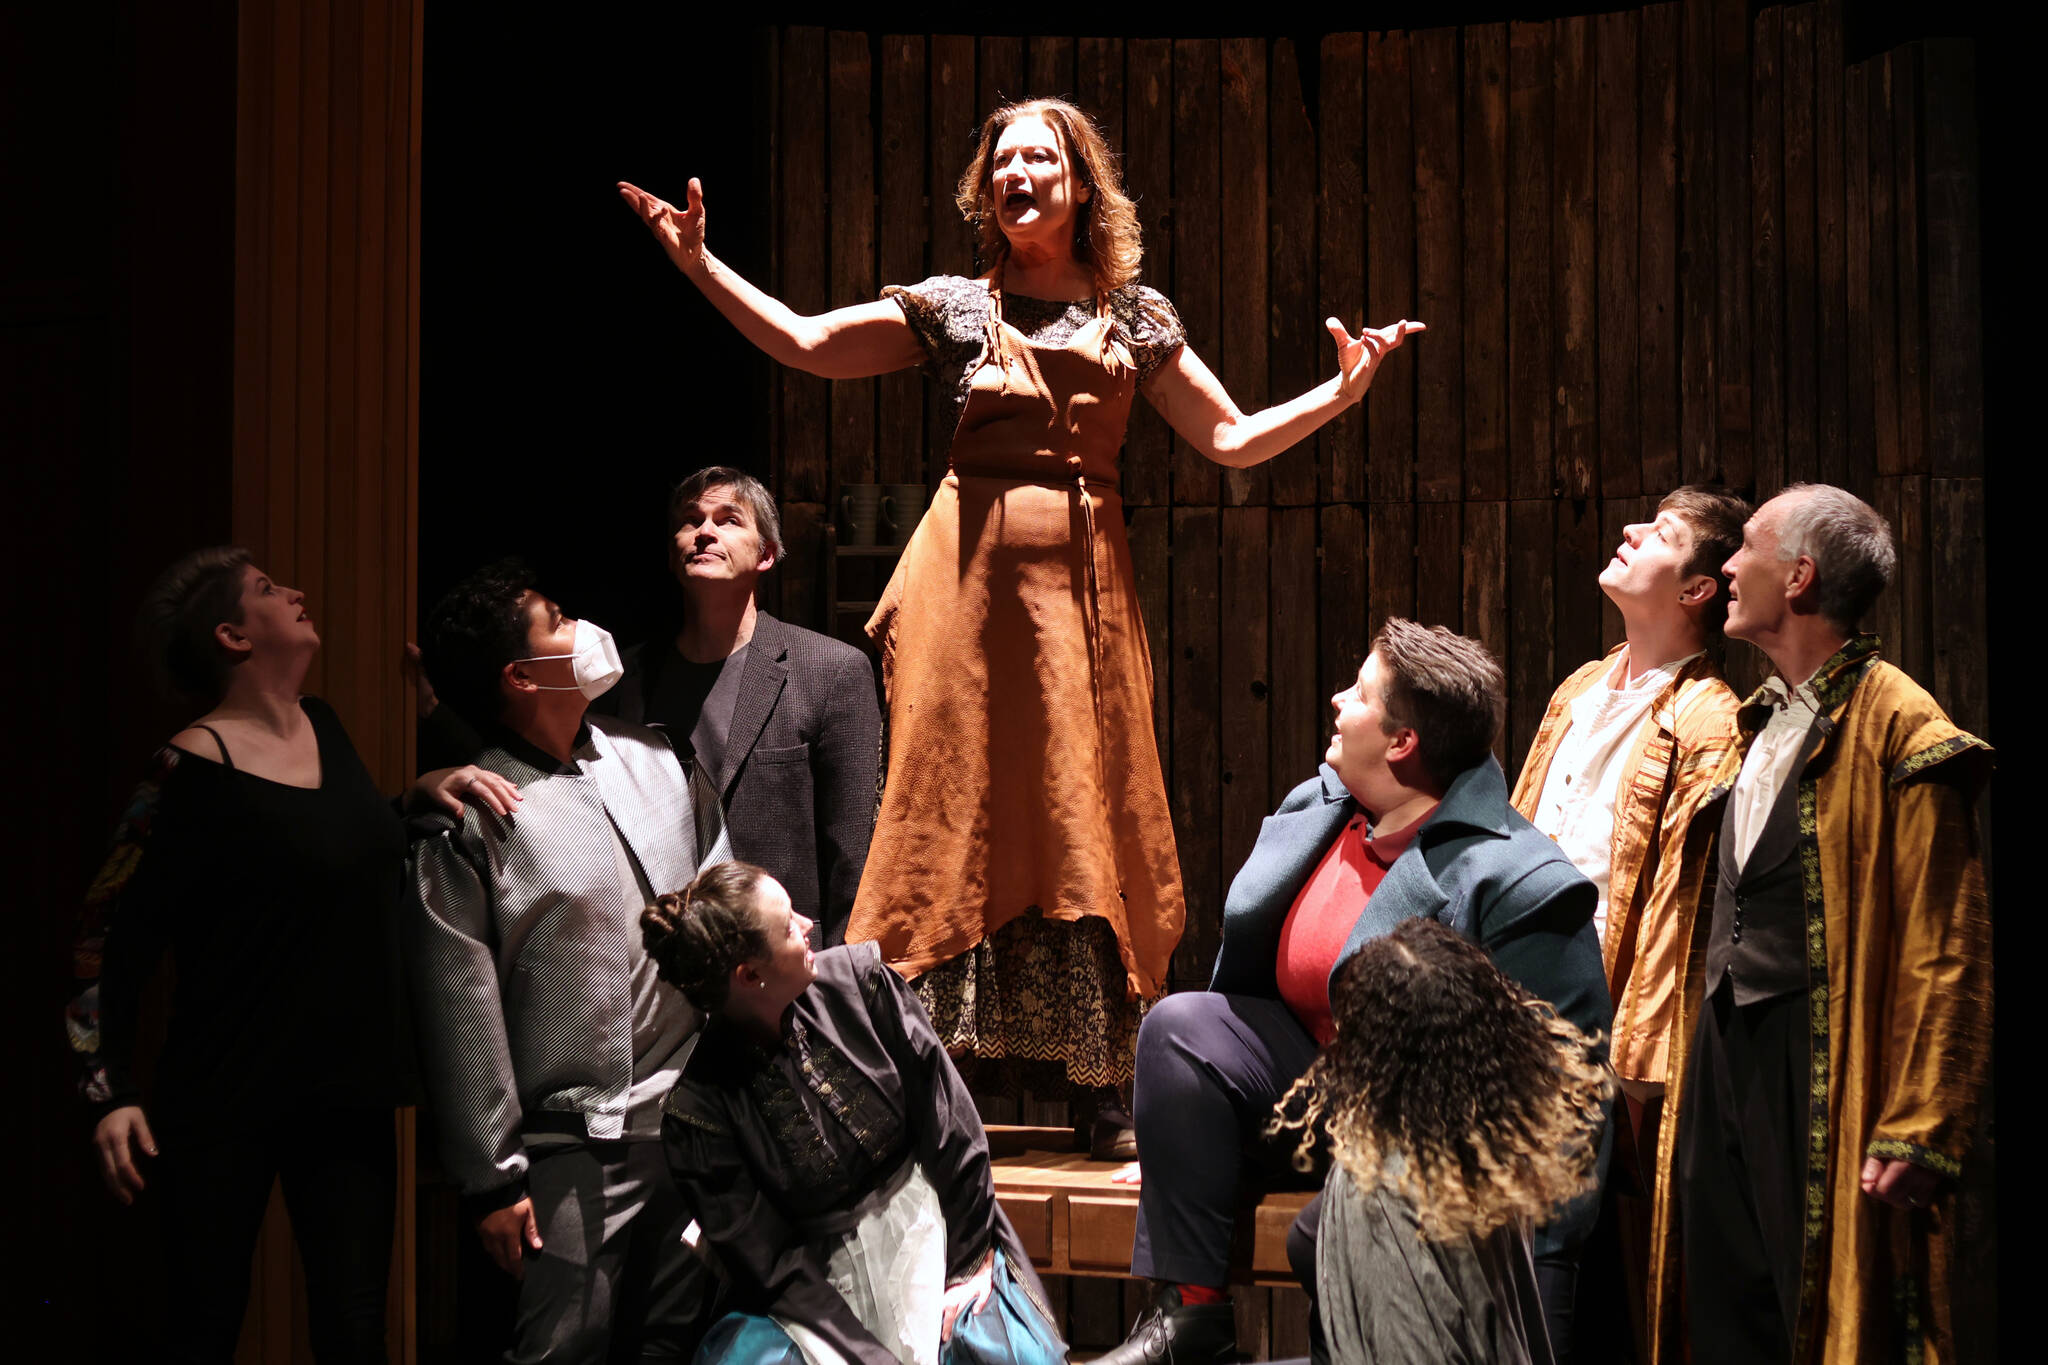 The cast of Theatre in the Rough’s production of “Witch” finishes off an unexpected musical number with flourish. From left to right: Stacy Katasse, Ty Yamoaka, Aaron Elmore, Katie Jensen, Cate Ross, Kelsey Riker, Salissa Thole, Dakota Morgan and Patrick Minik. The local company’s production of the play includes a few musical moments unique to the Juneau effort. Below, Scratch (Kelsey Riker) enters a scene with a devilish grin during rehearsal.